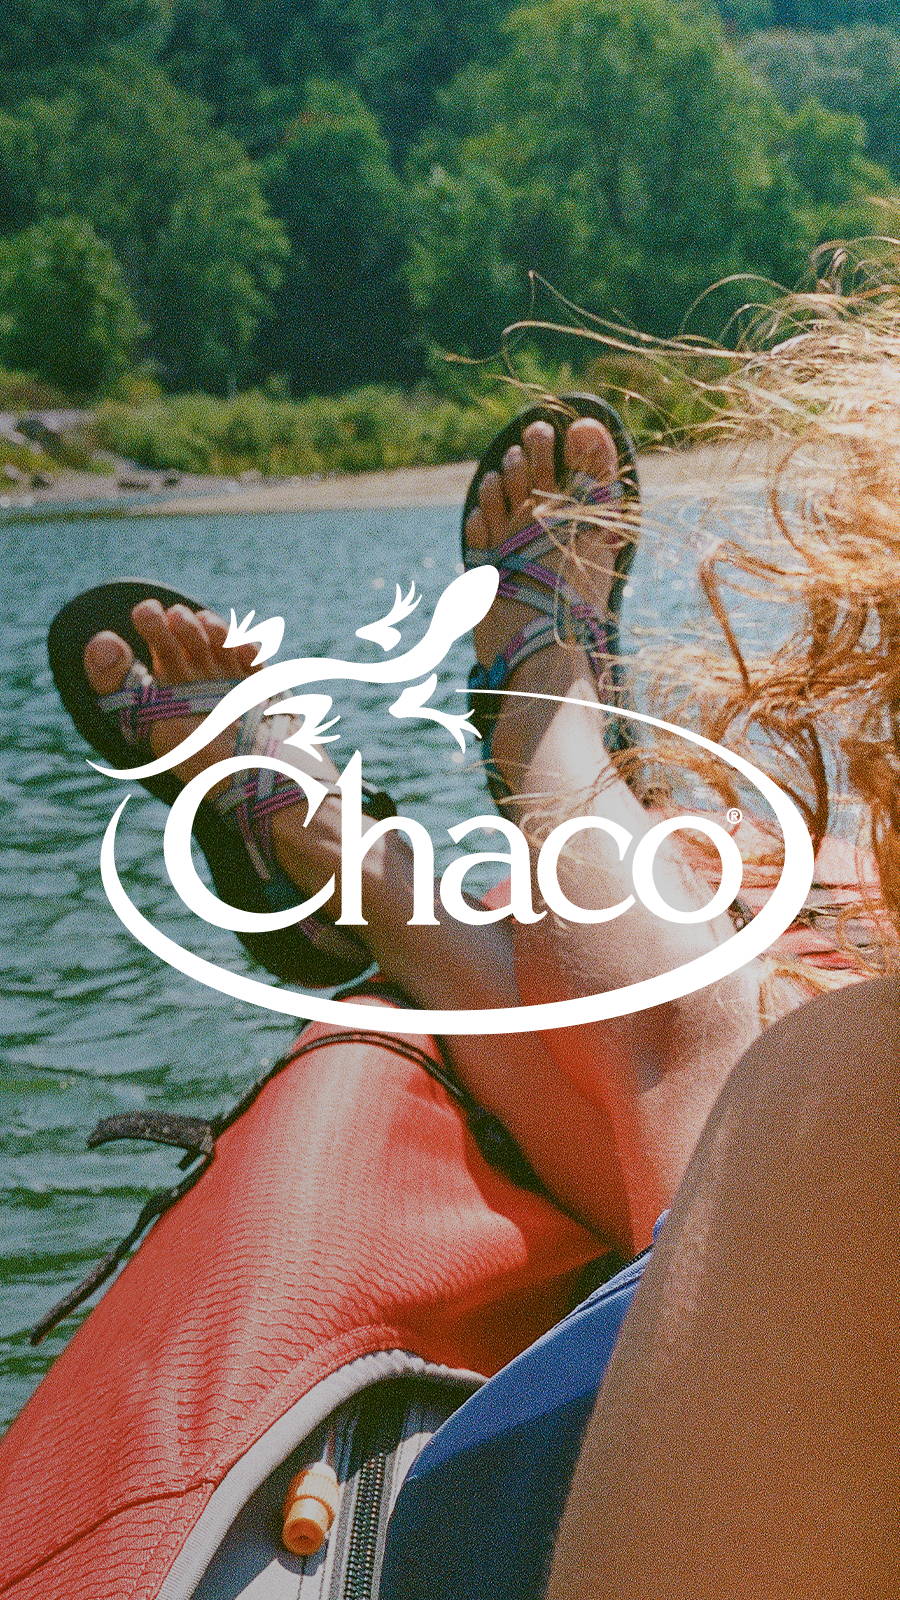 Young woman wearing Chacos resting feet on side of kayak in the middle of a lake